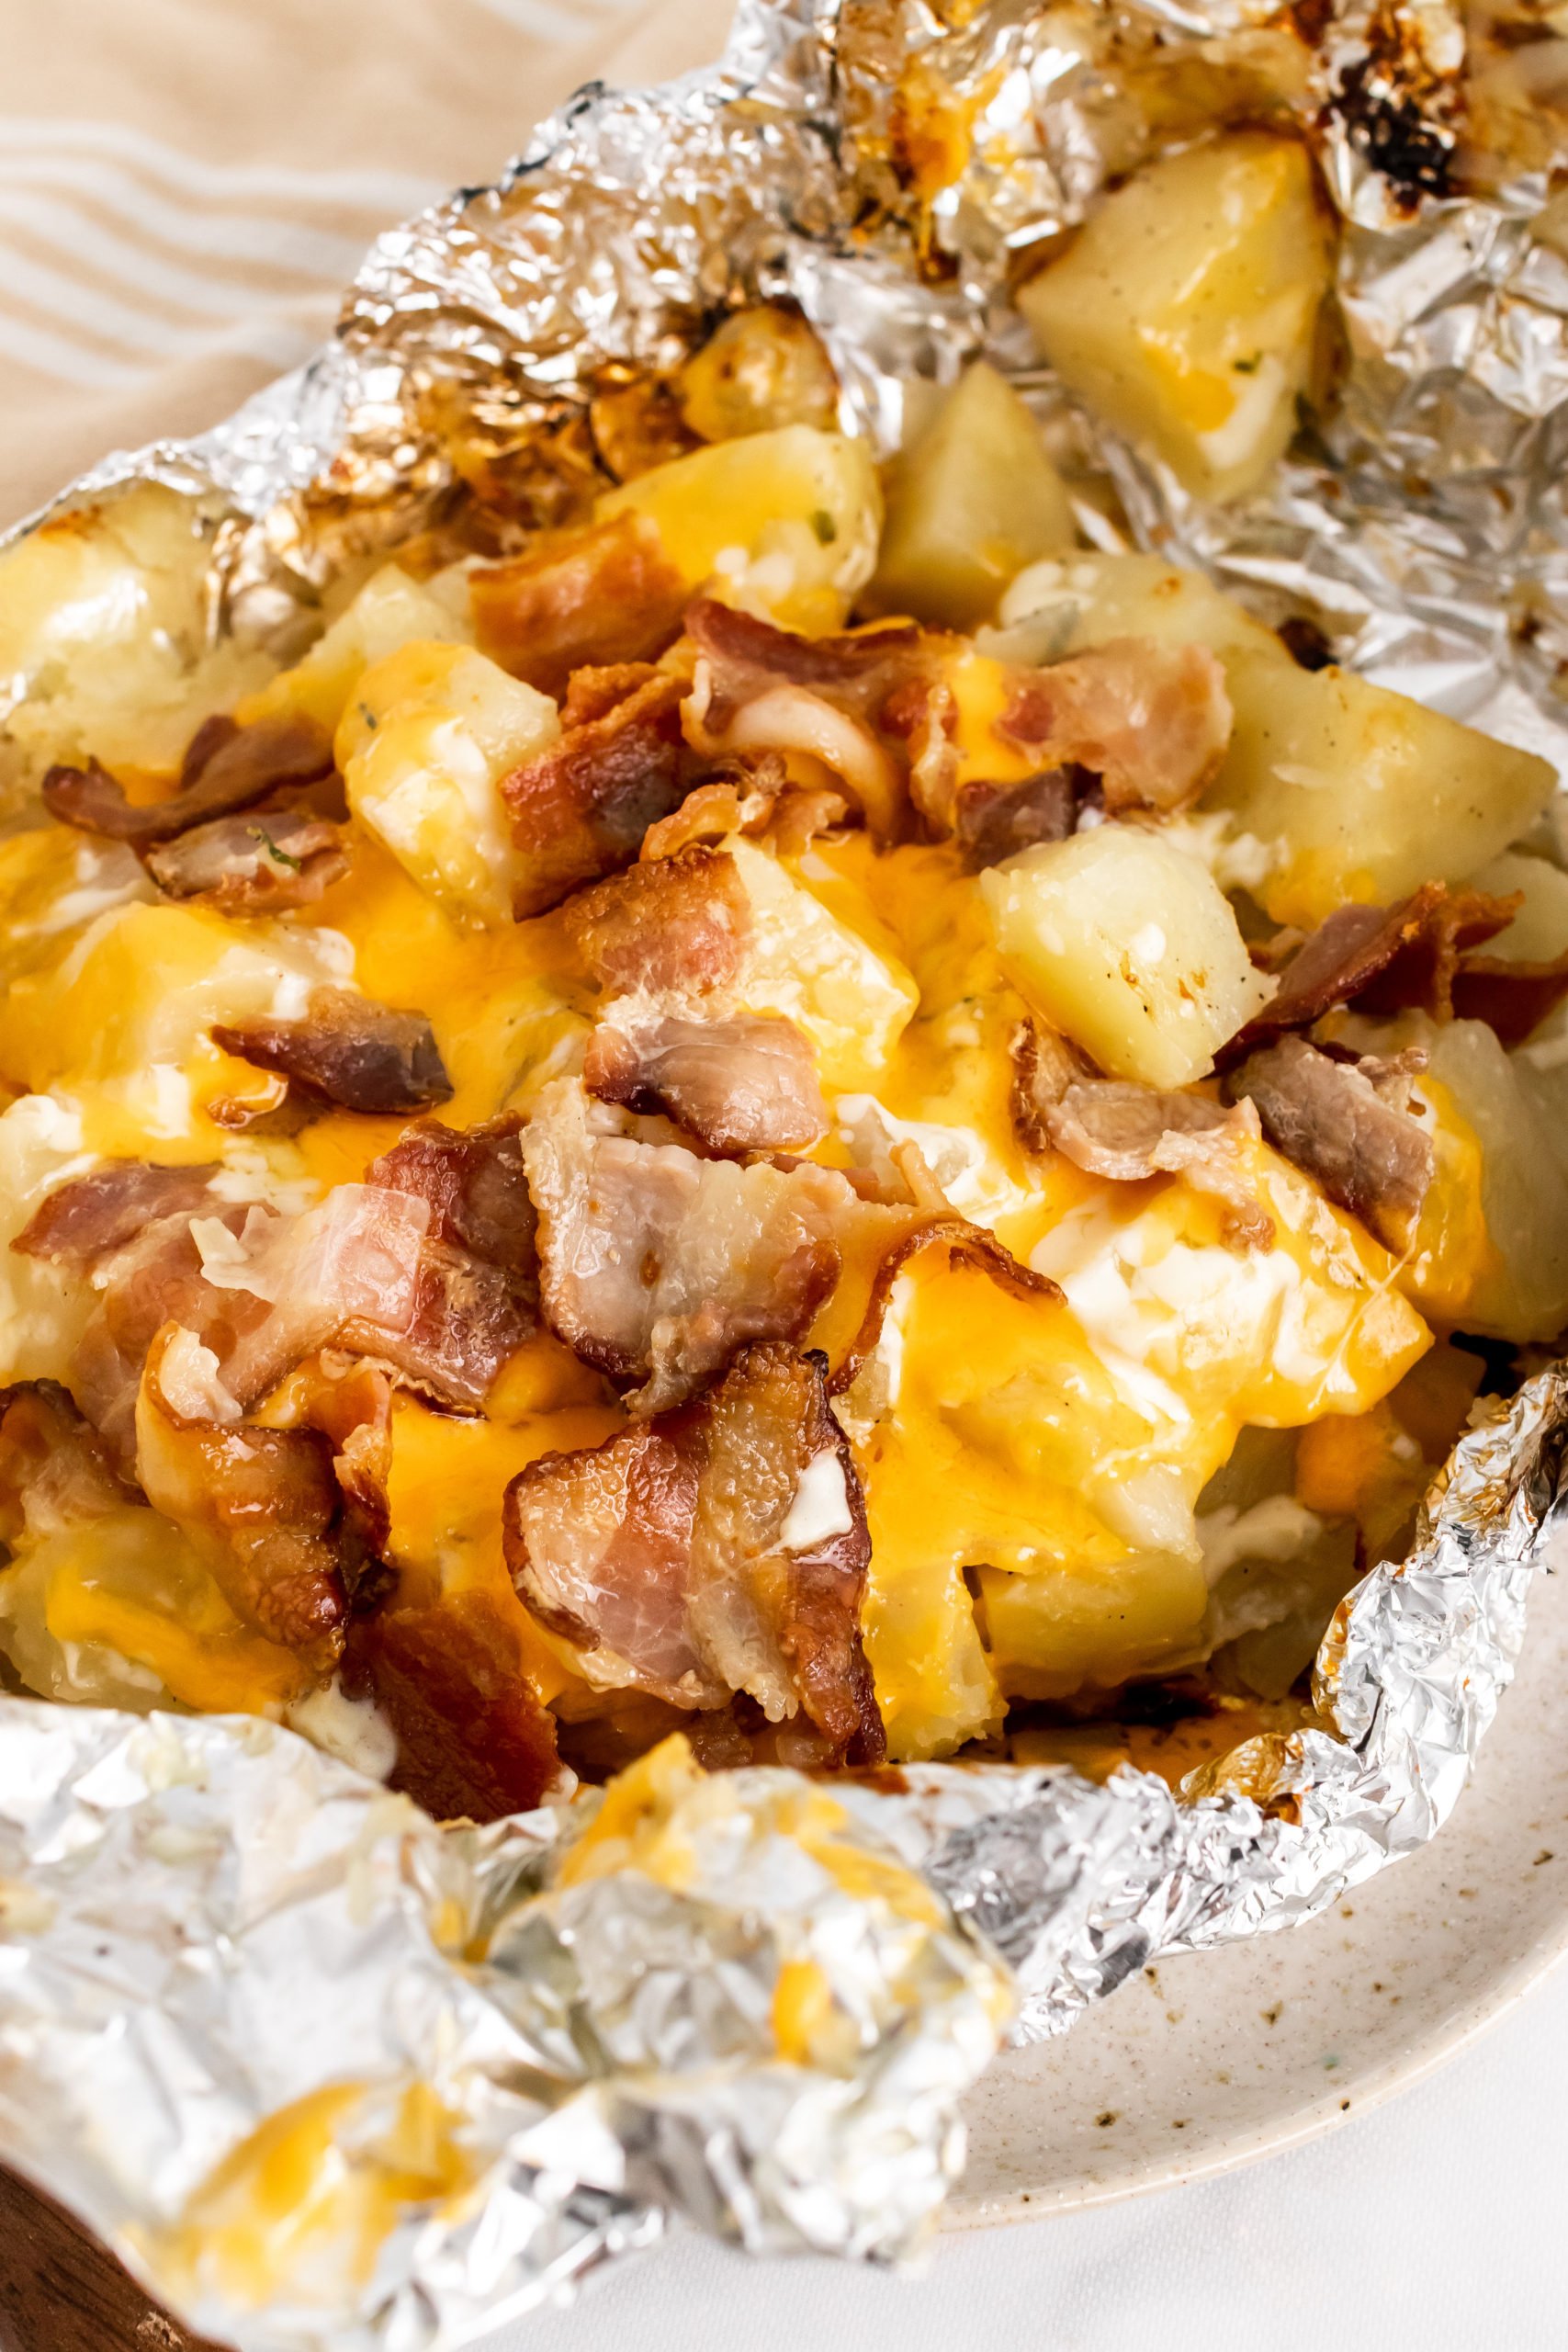 a foil packet torn open to reveal grilled potatoes covered in a blend of melted cheeses